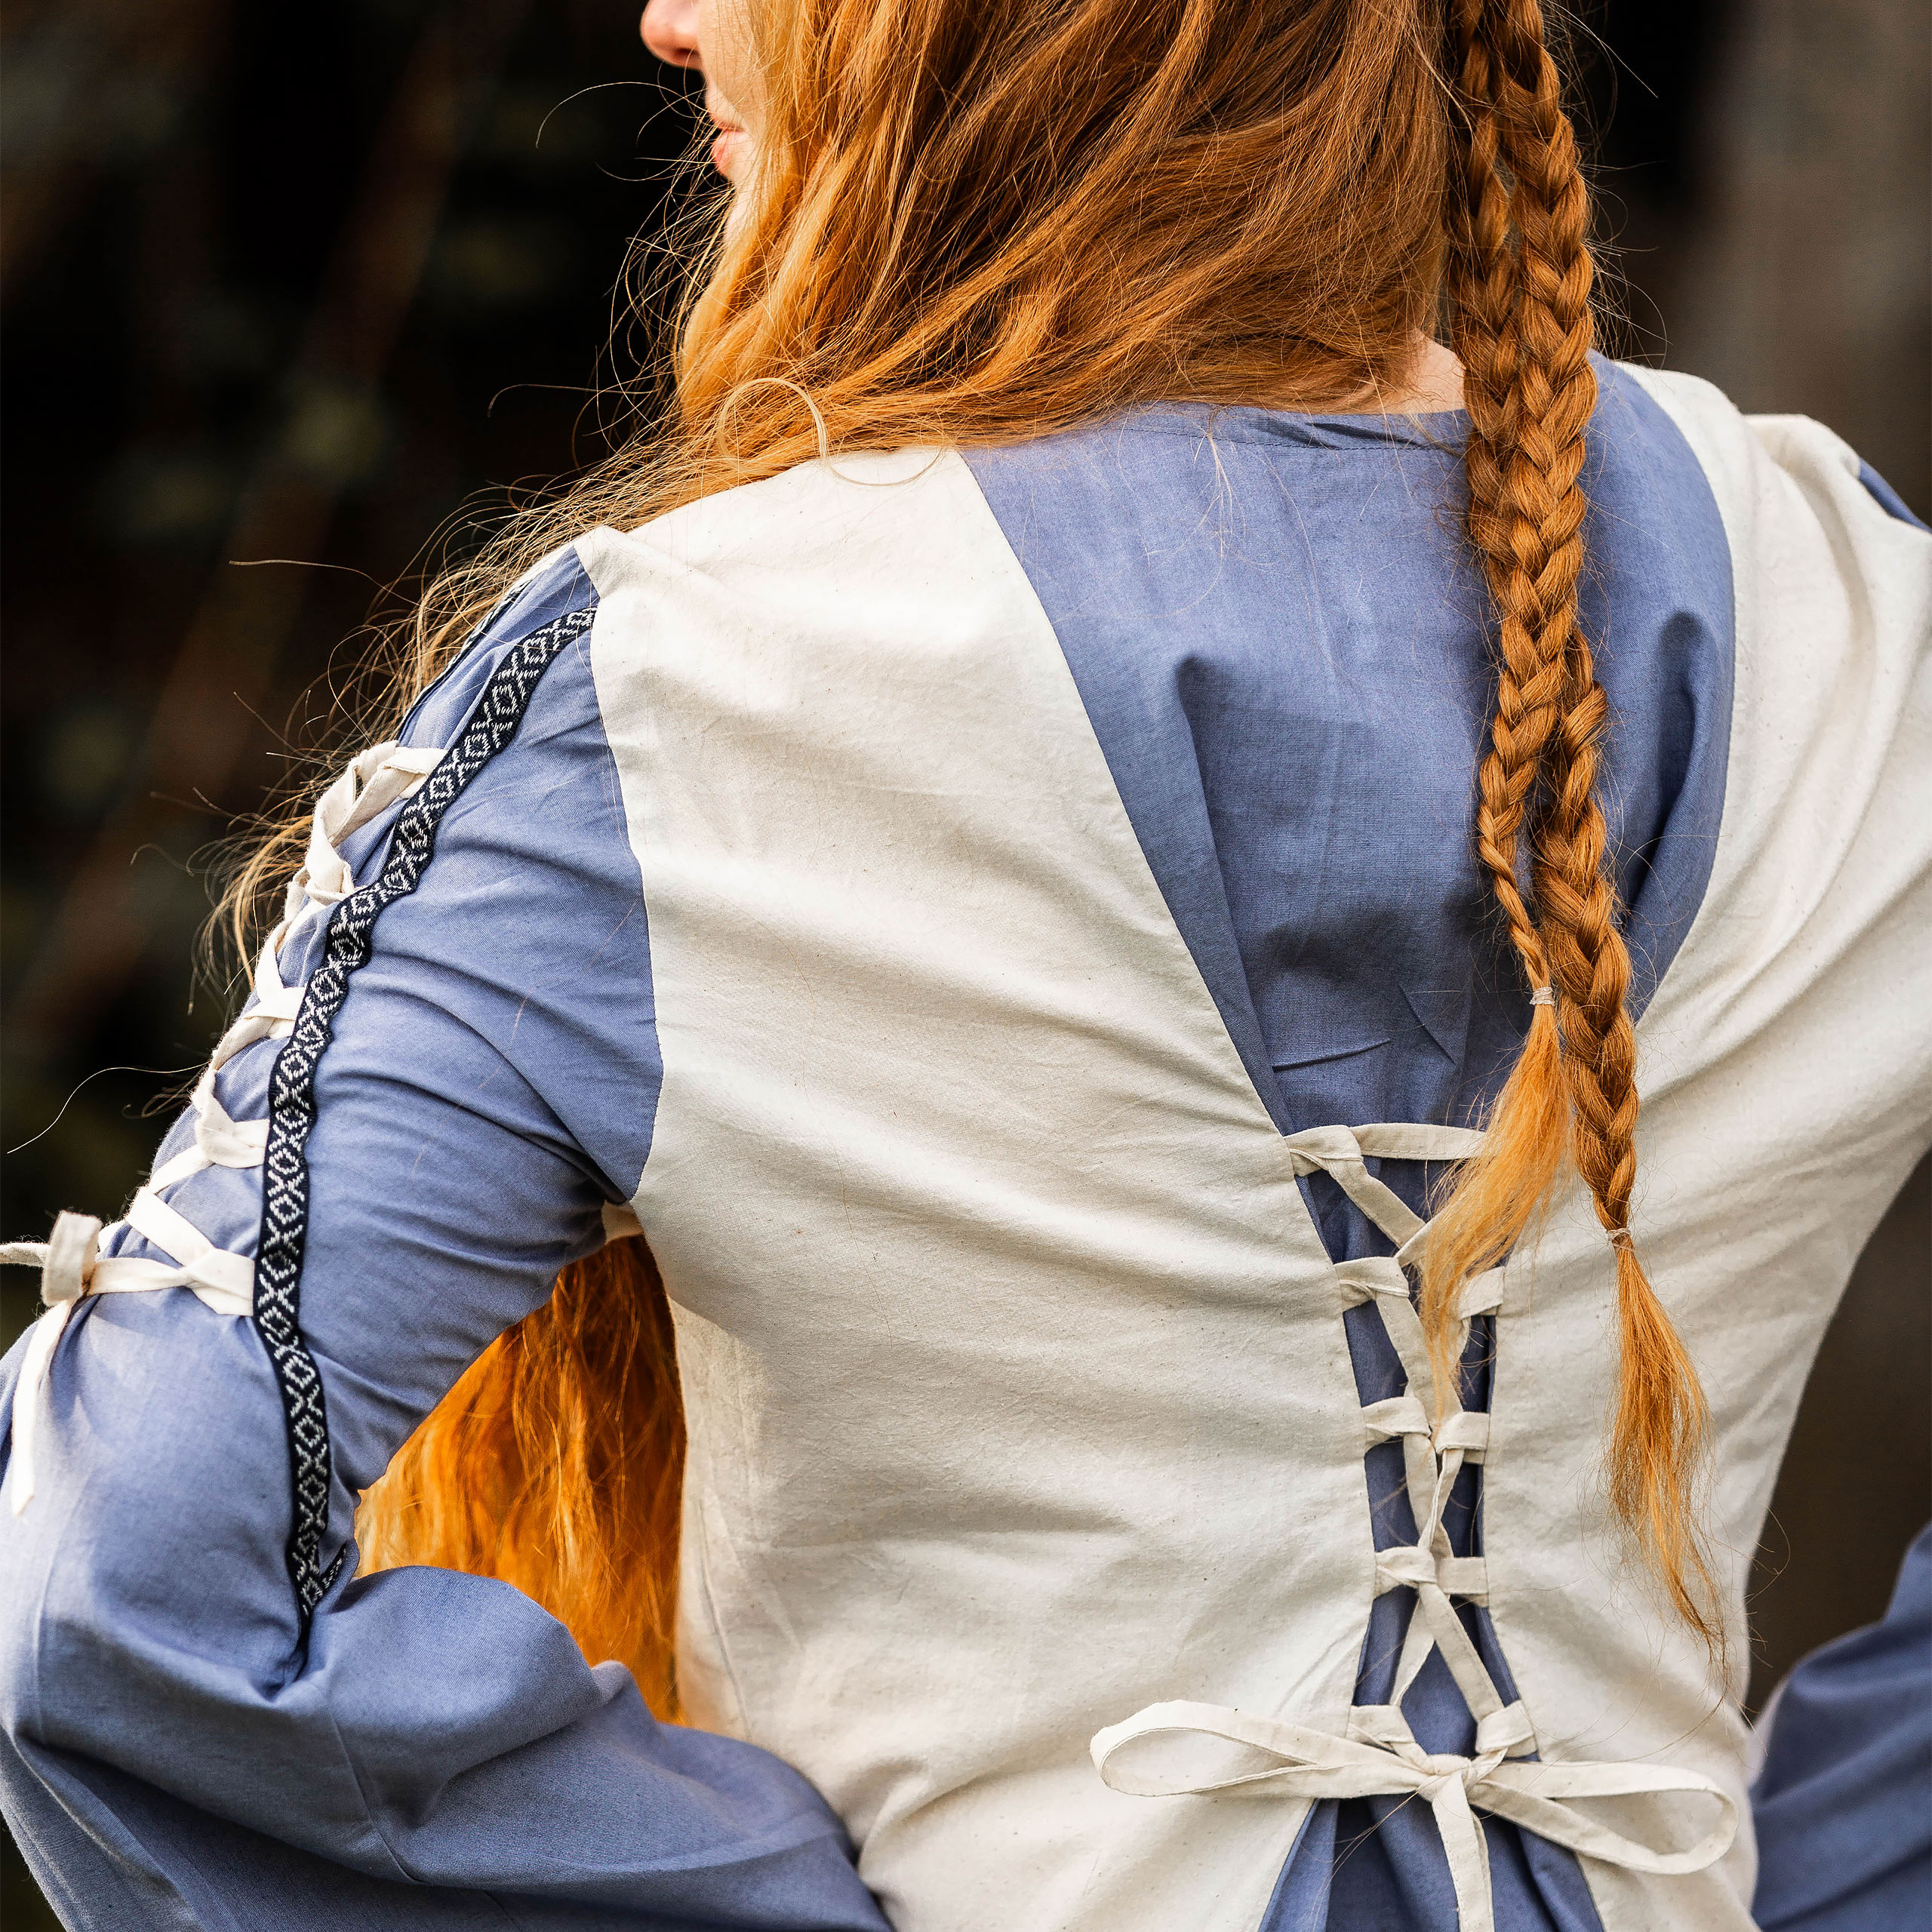 Medieval dress with lacing blue-nature